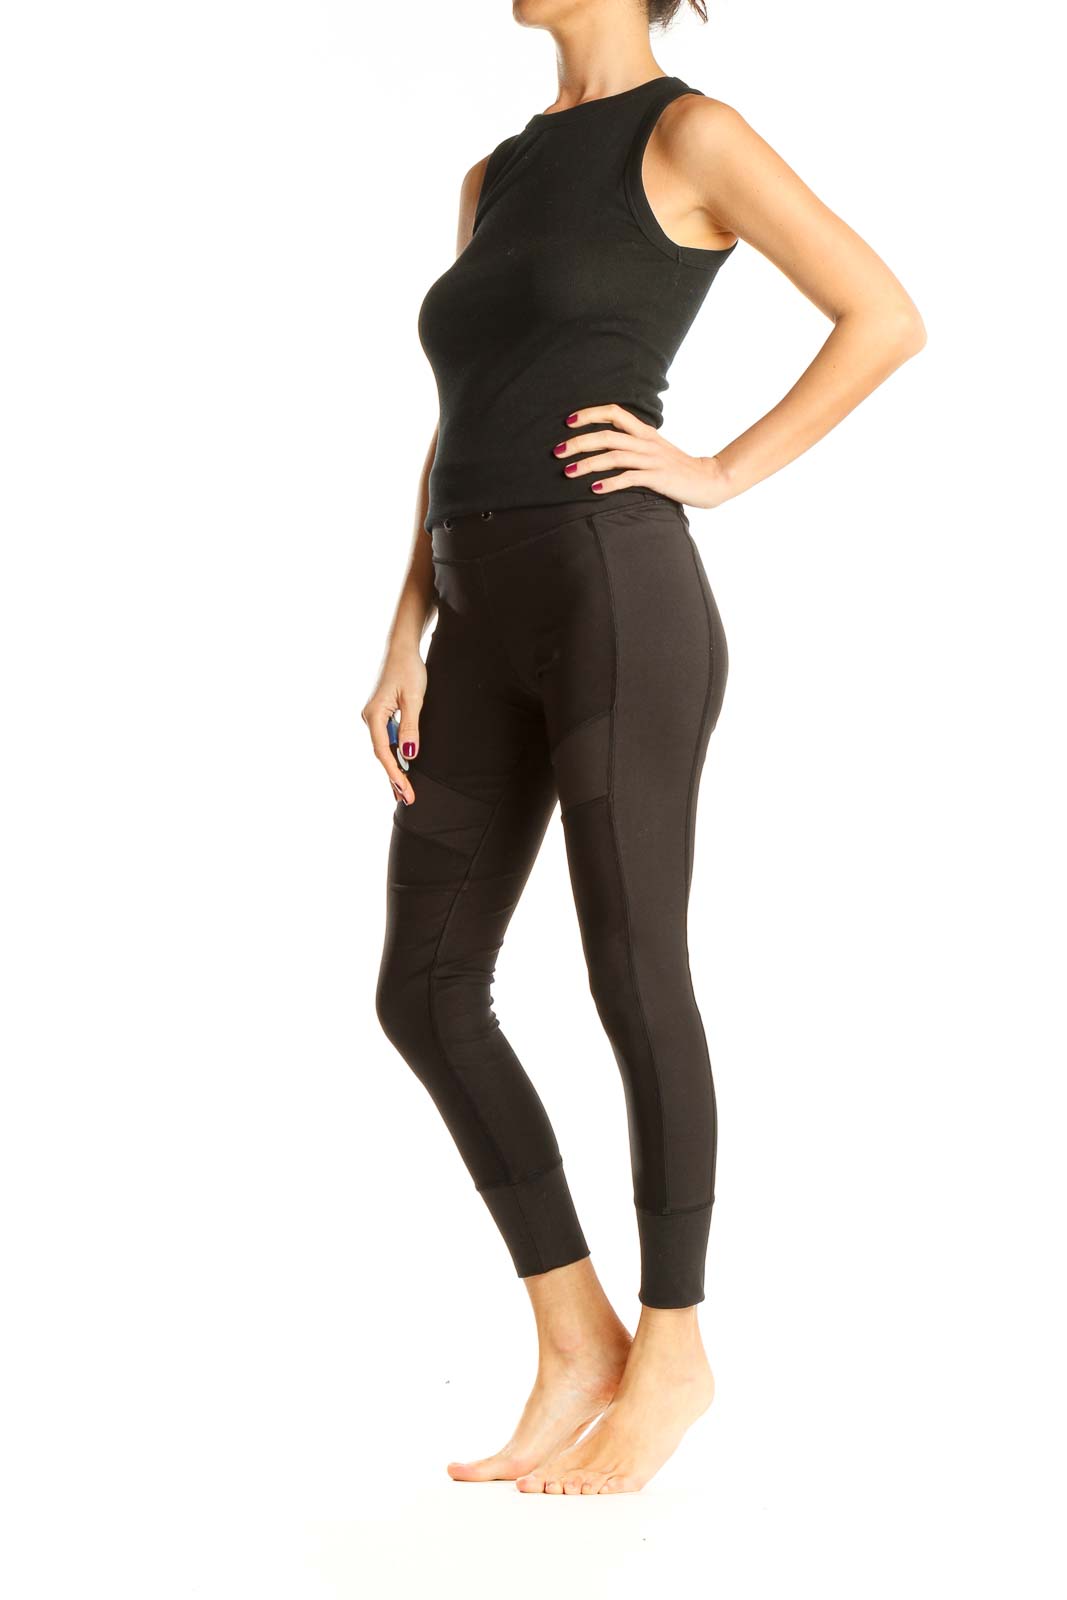 X by Gottex - Black Textured Activewear Leggings Polyester Spandex